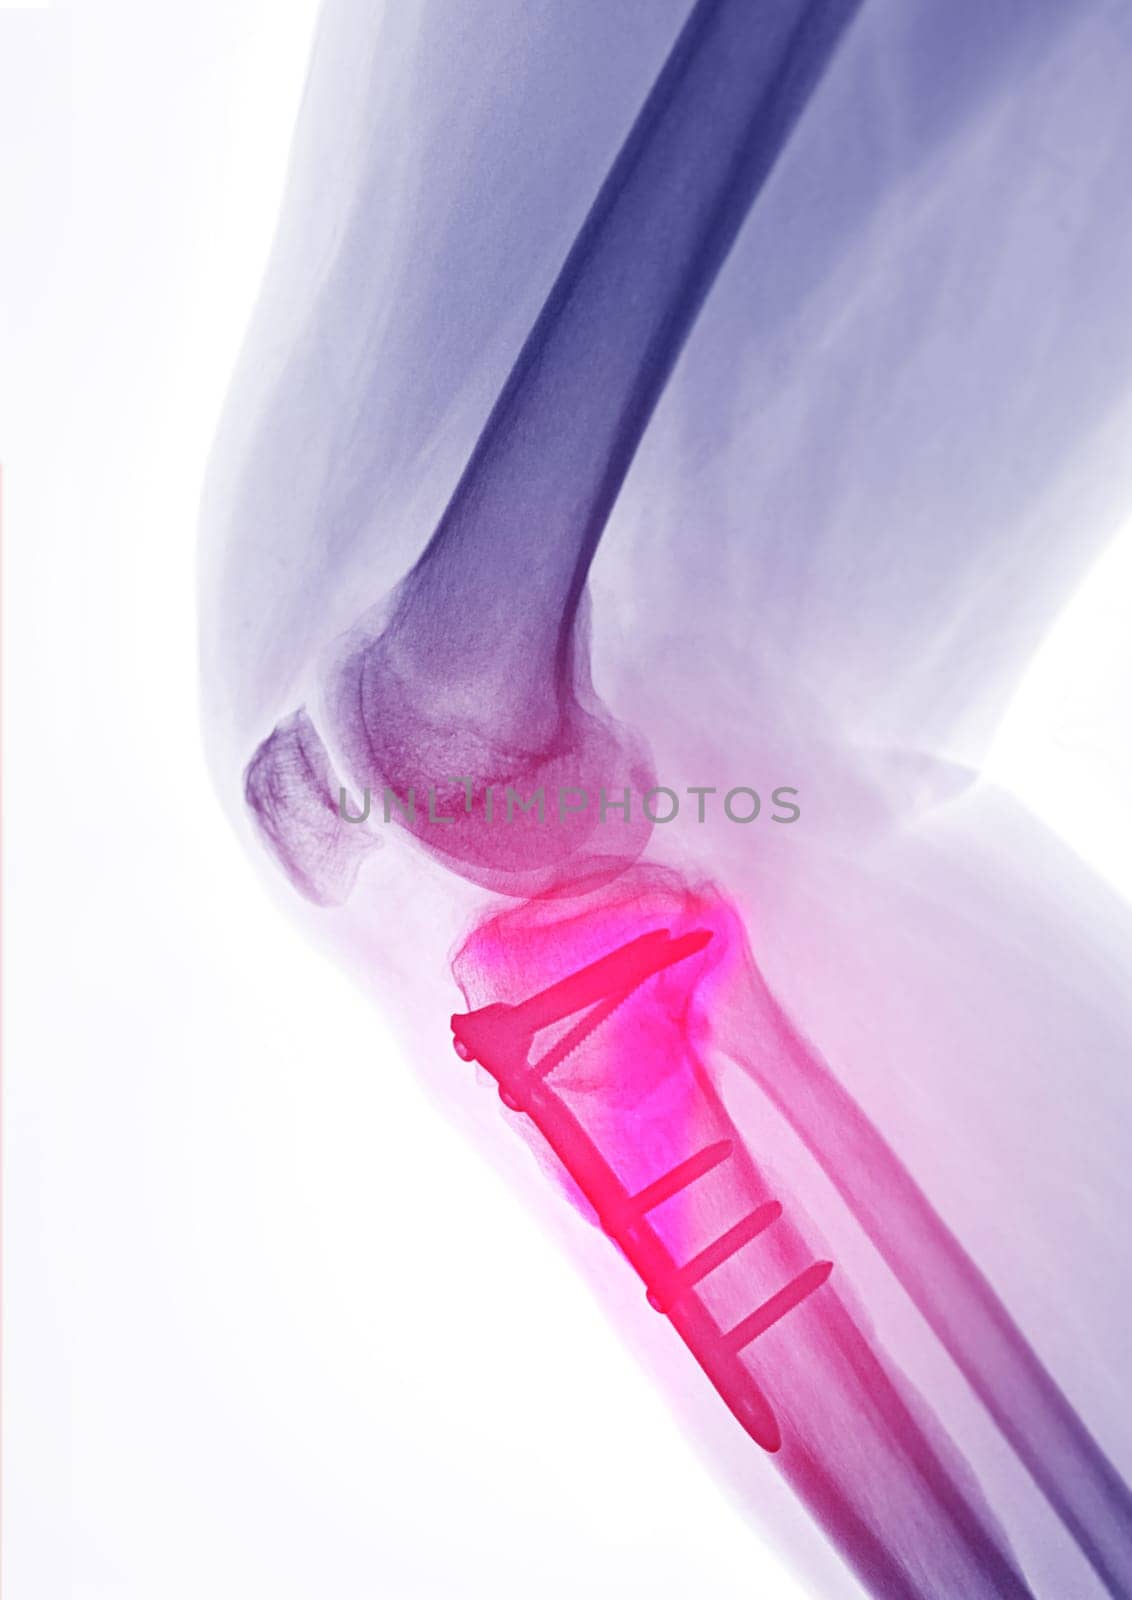 X-ray image of  Right knee  Lateral view showing Total knee arthroplasty and fractures of the tibial plateau with plate and screw fixation.